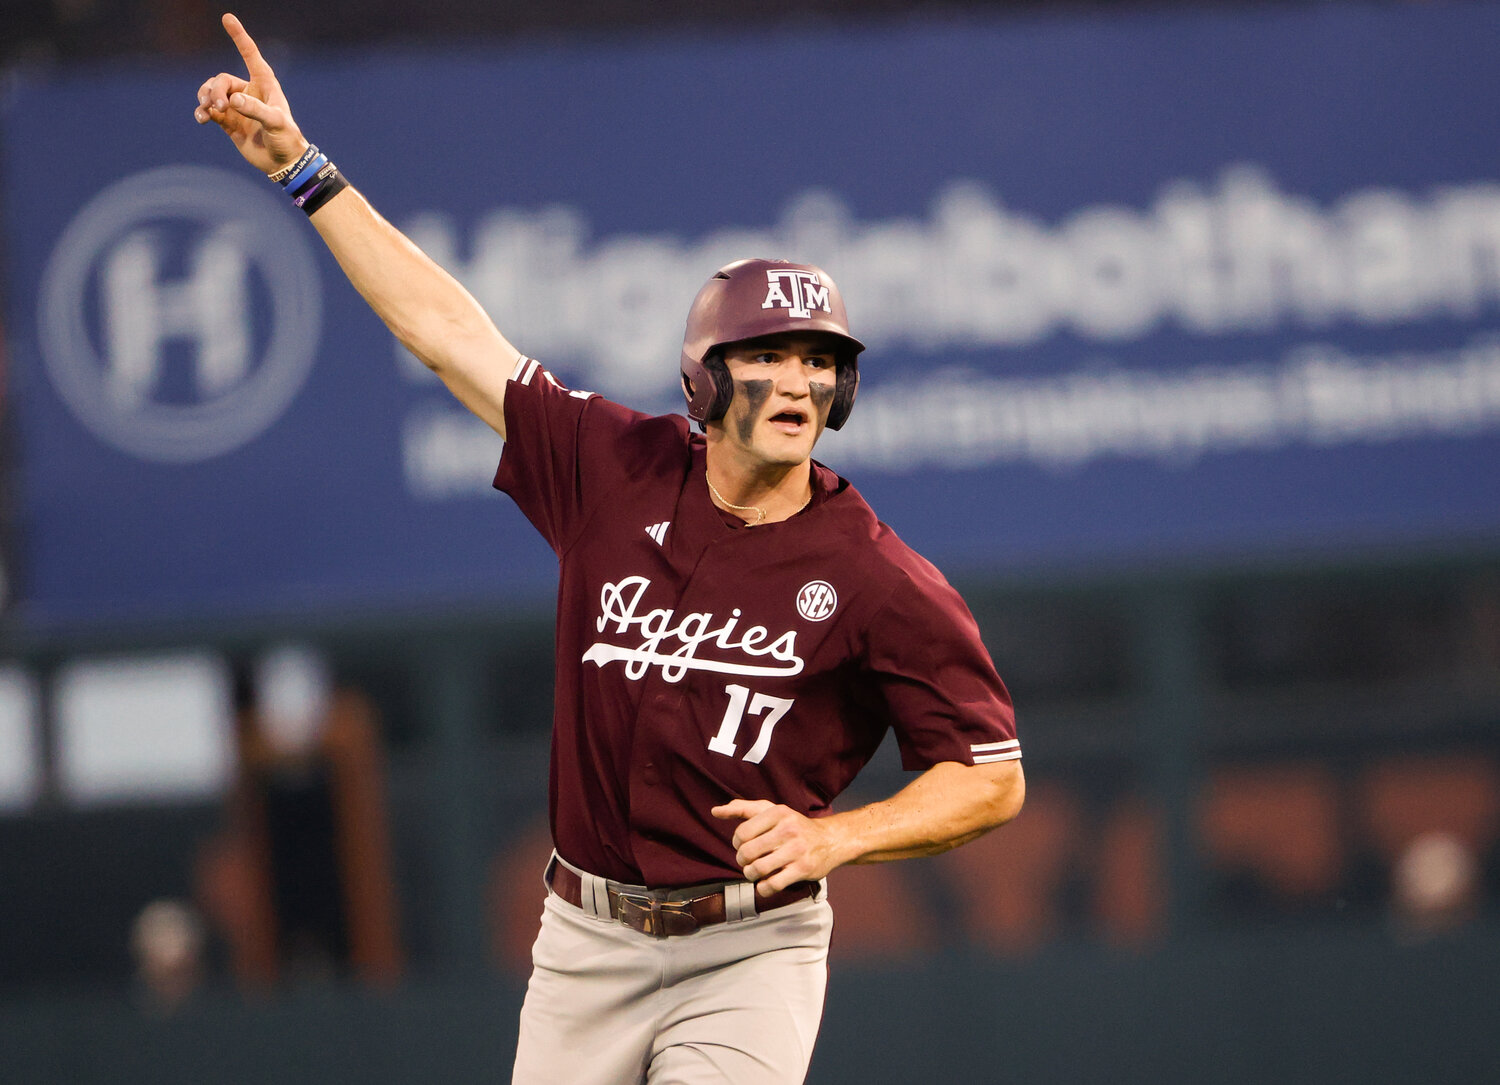 Tompkins graduate LaViolette leads Aggies to College World Series Championship Series